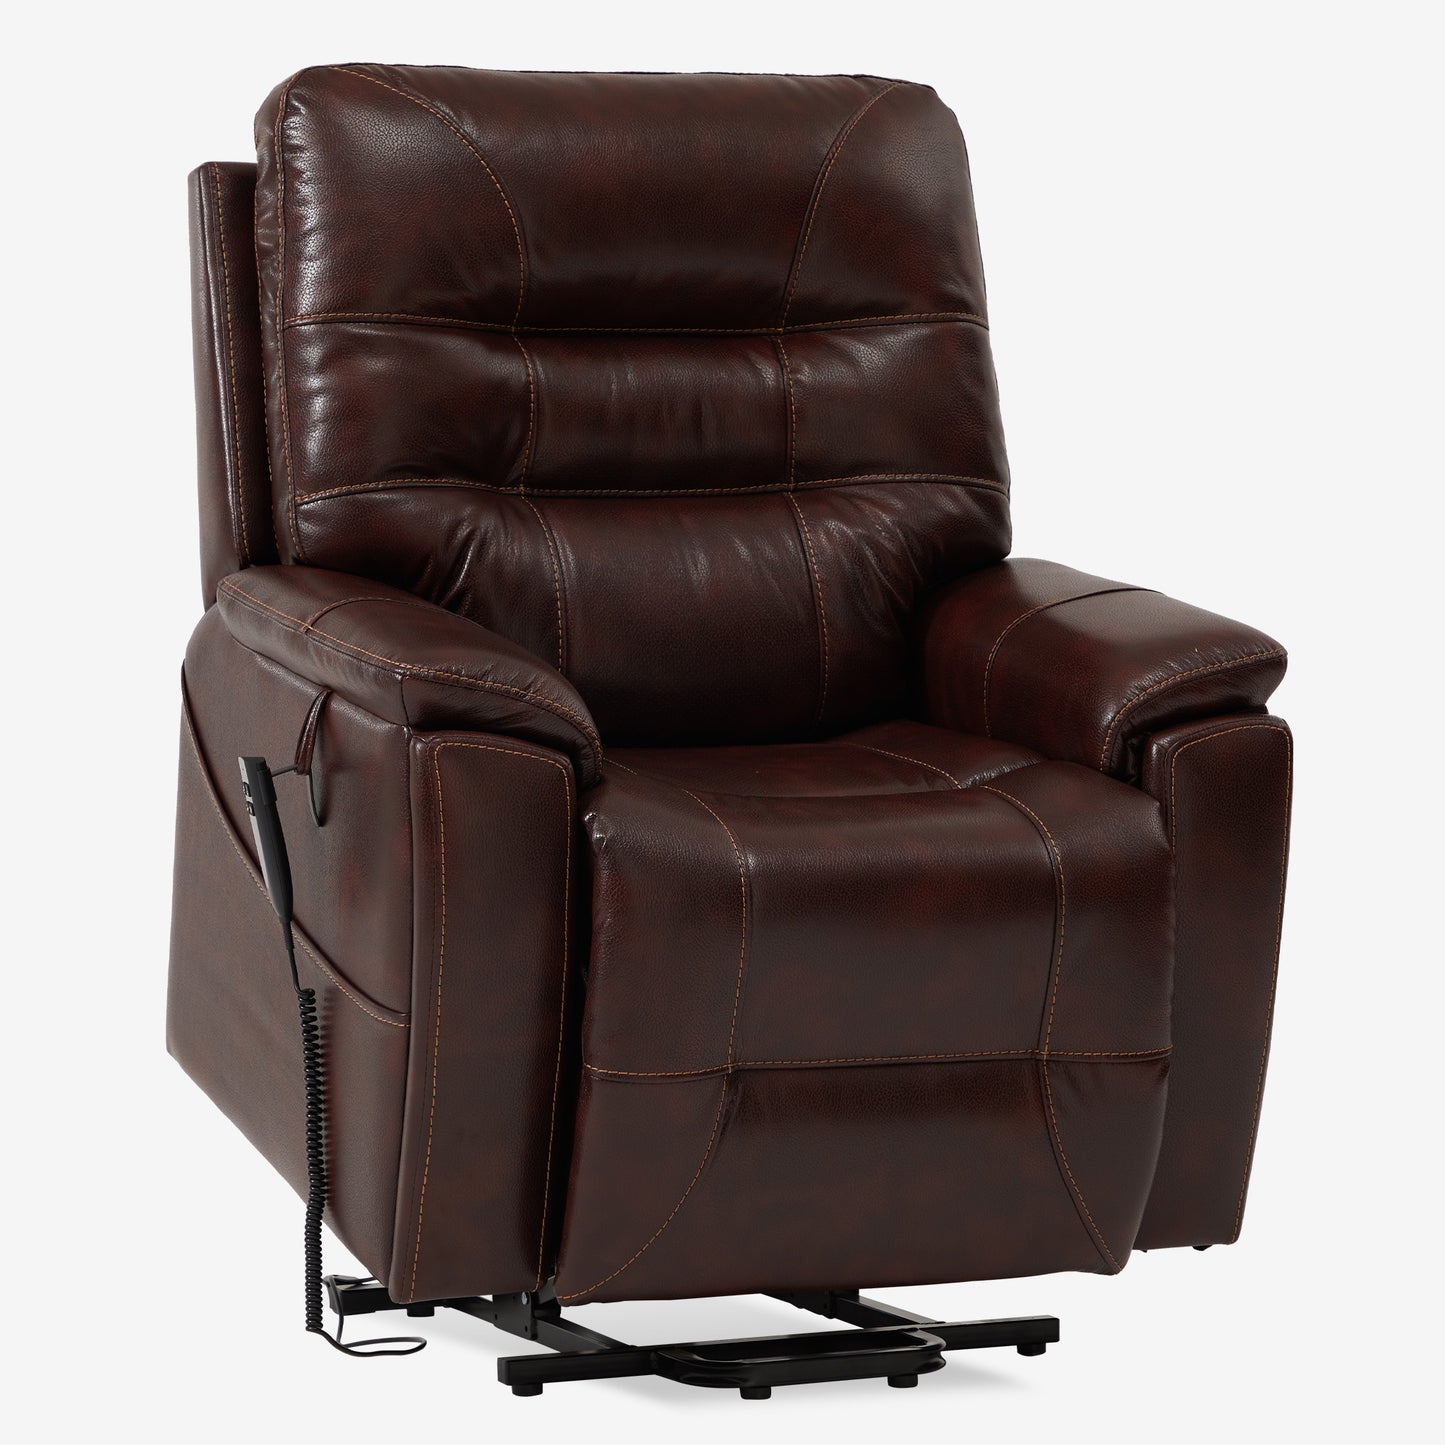 Extra Wide Heavy Duty Lift Chair With Cup Holder And Lay Flat